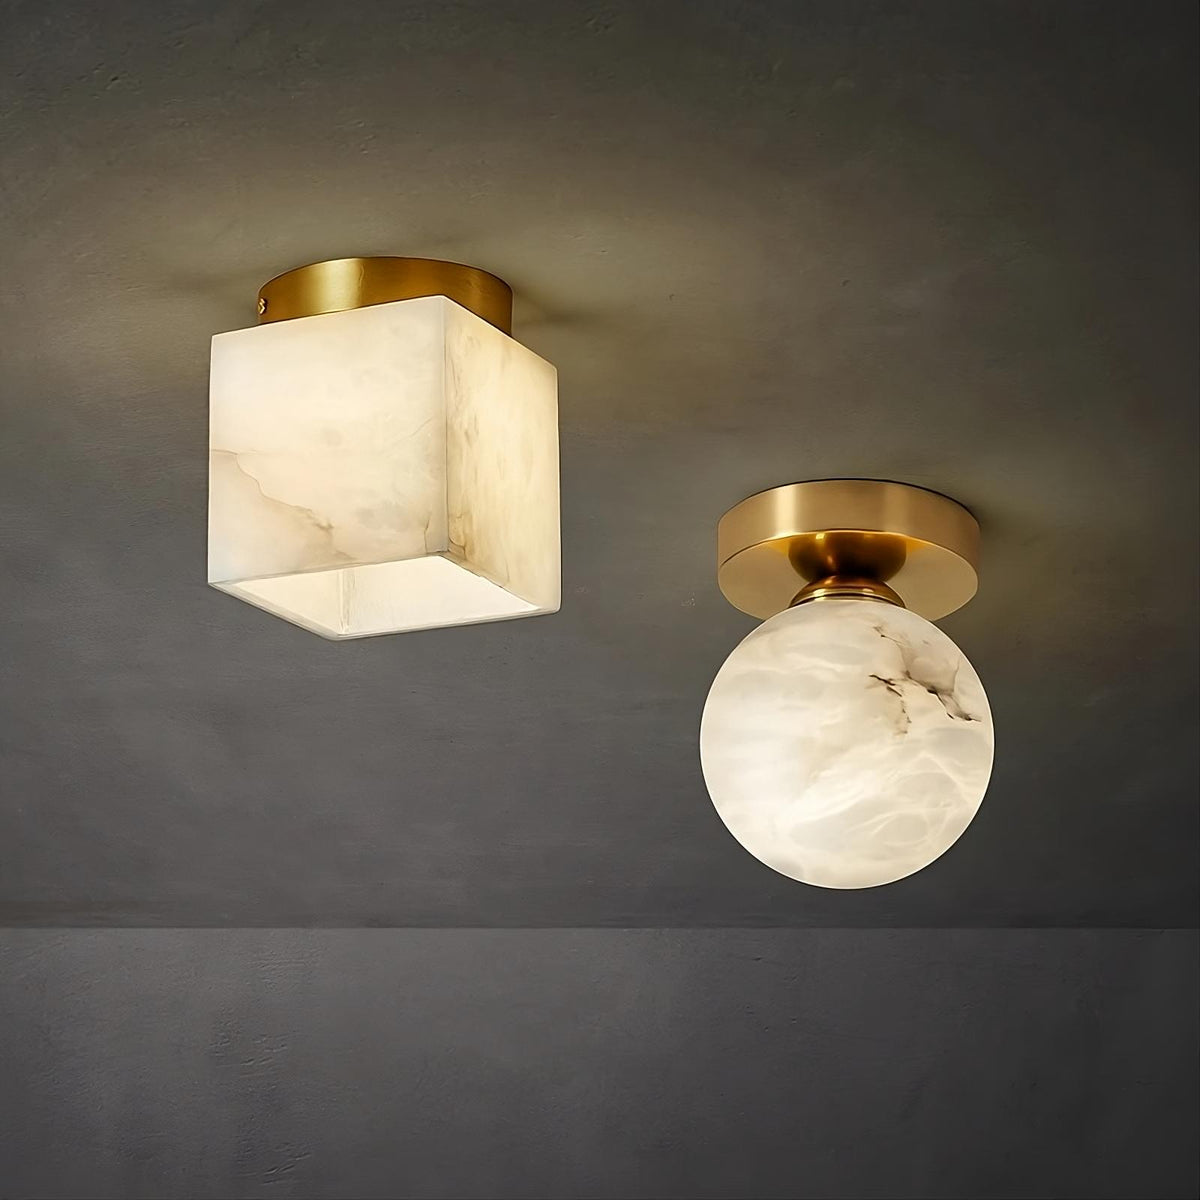 An image showing two ceiling lights with a modern design. One **Natural Marble Hallway Ceiling Light Fixture** by **Morsale.com** has a cube-shaped frosted shade, and the other has a round frosted shade. Both lights have gold-toned fixtures and are mounted on a dark gray ceiling.